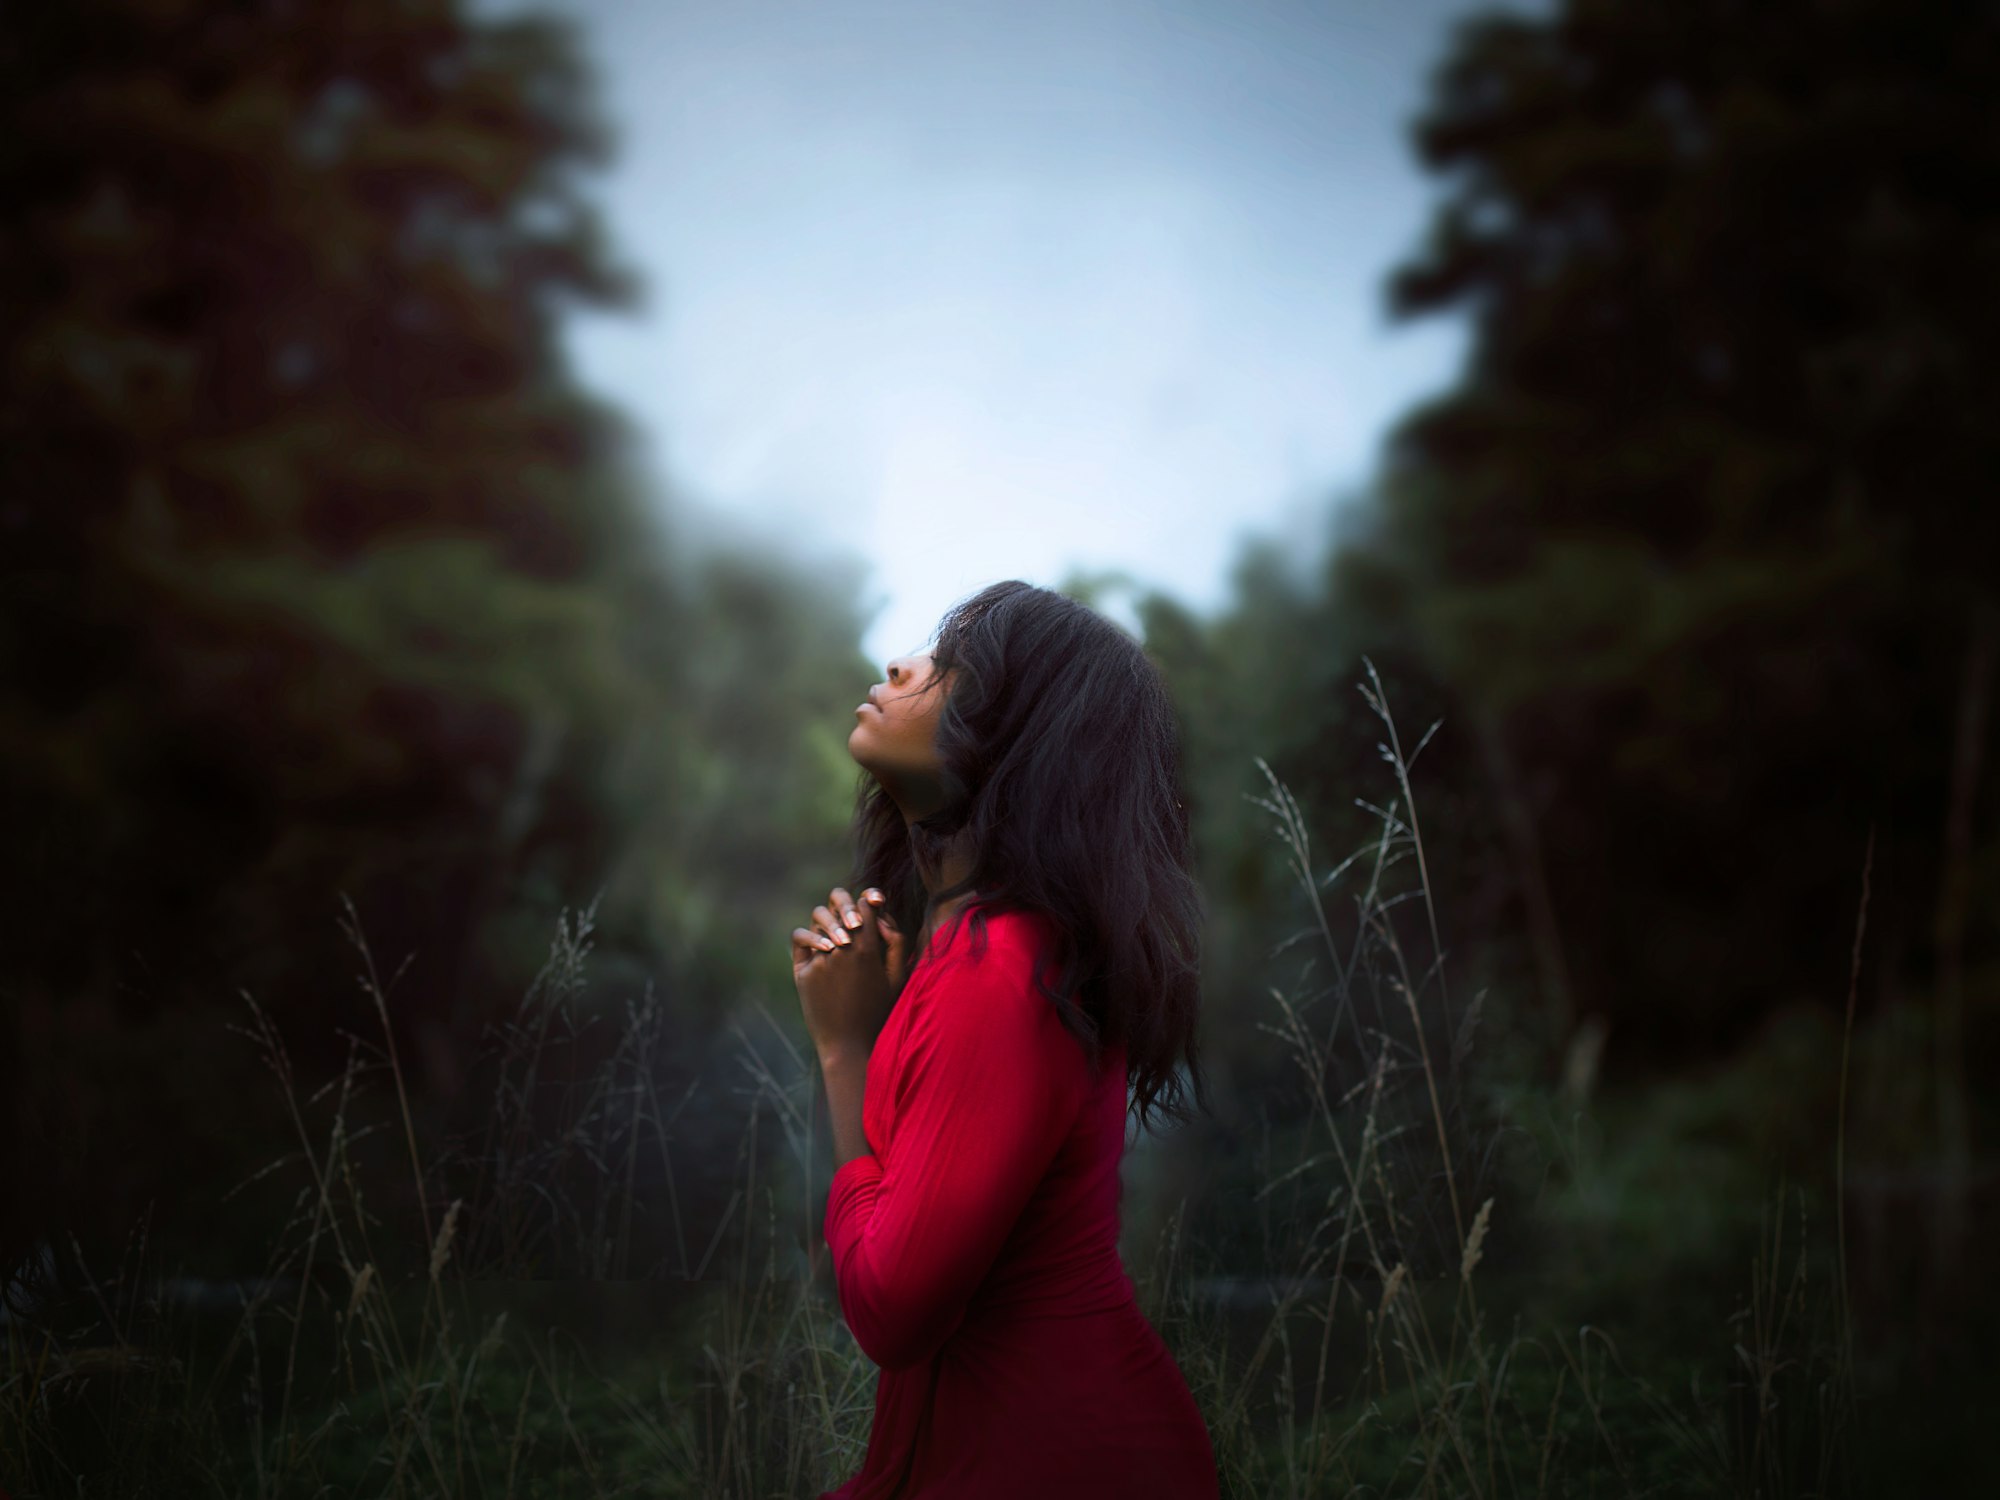 Woman holding her hands in prayer and looking up.